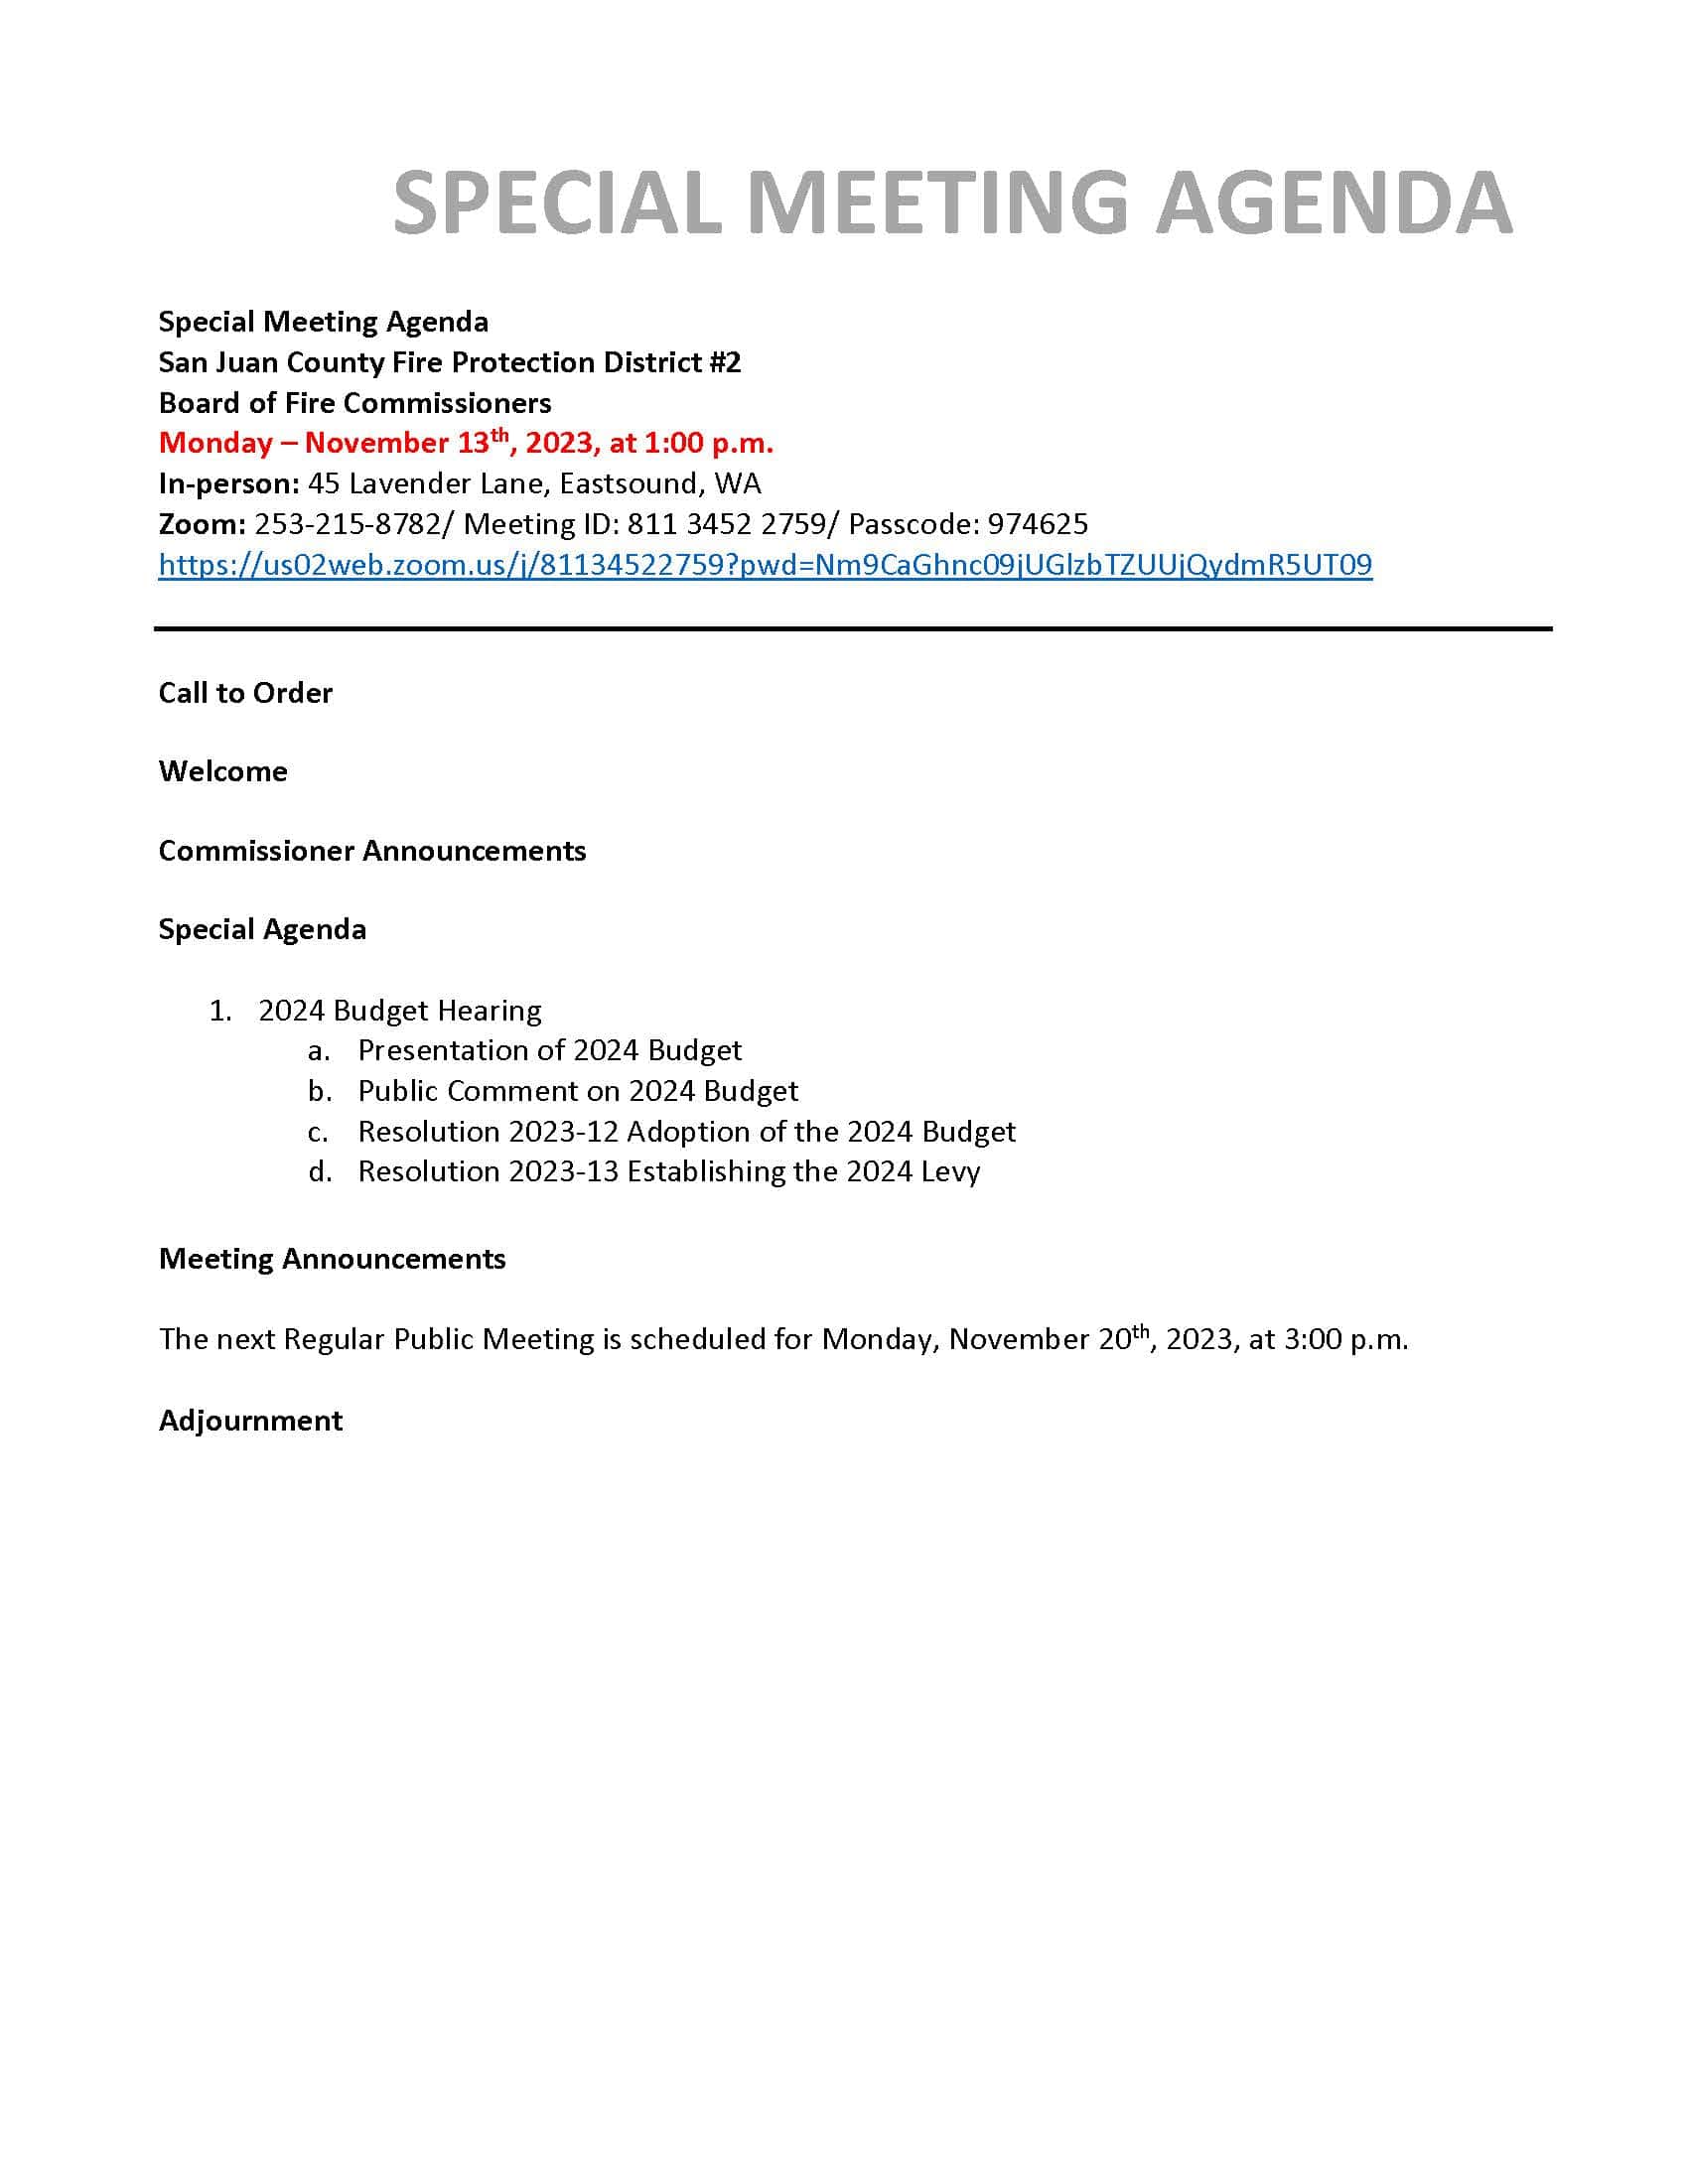 2023-11-09 2024 Budget Hearing Special Meeting Agenda